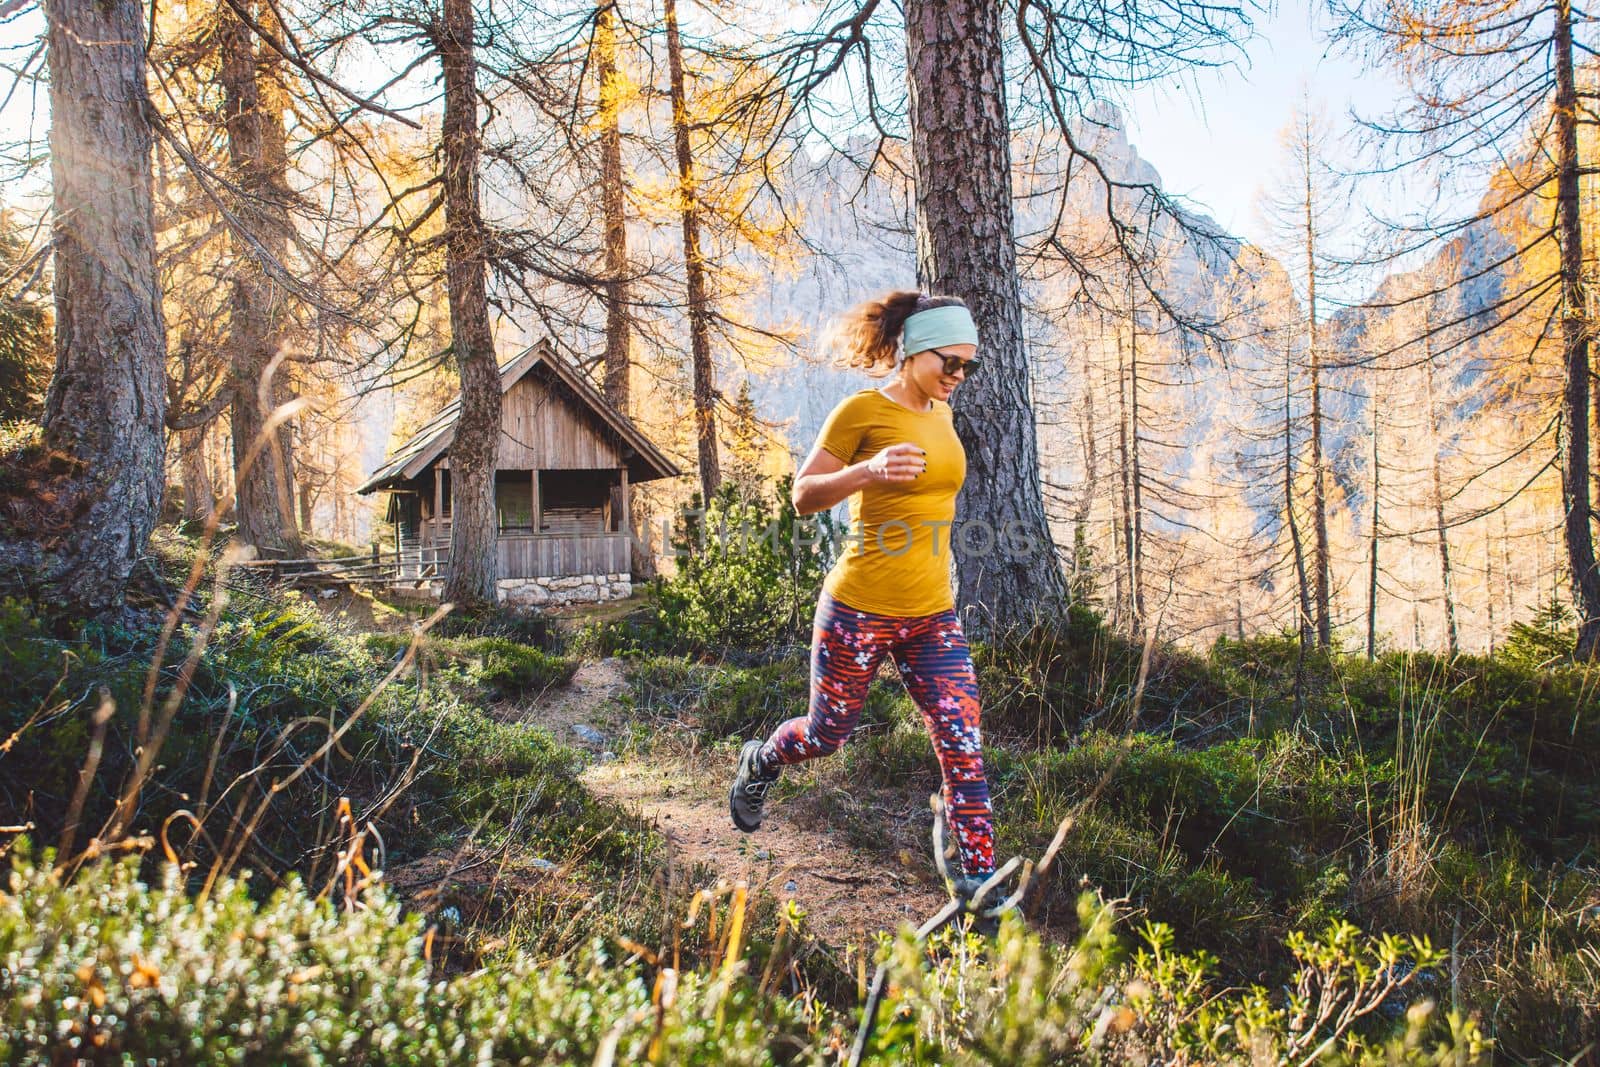 Joyful woman hiker running in the autumn forest, wearing an orange shirt and colorful leggings. Woman jumping in the air while hiking trough the forest. Sunny autumn hike.